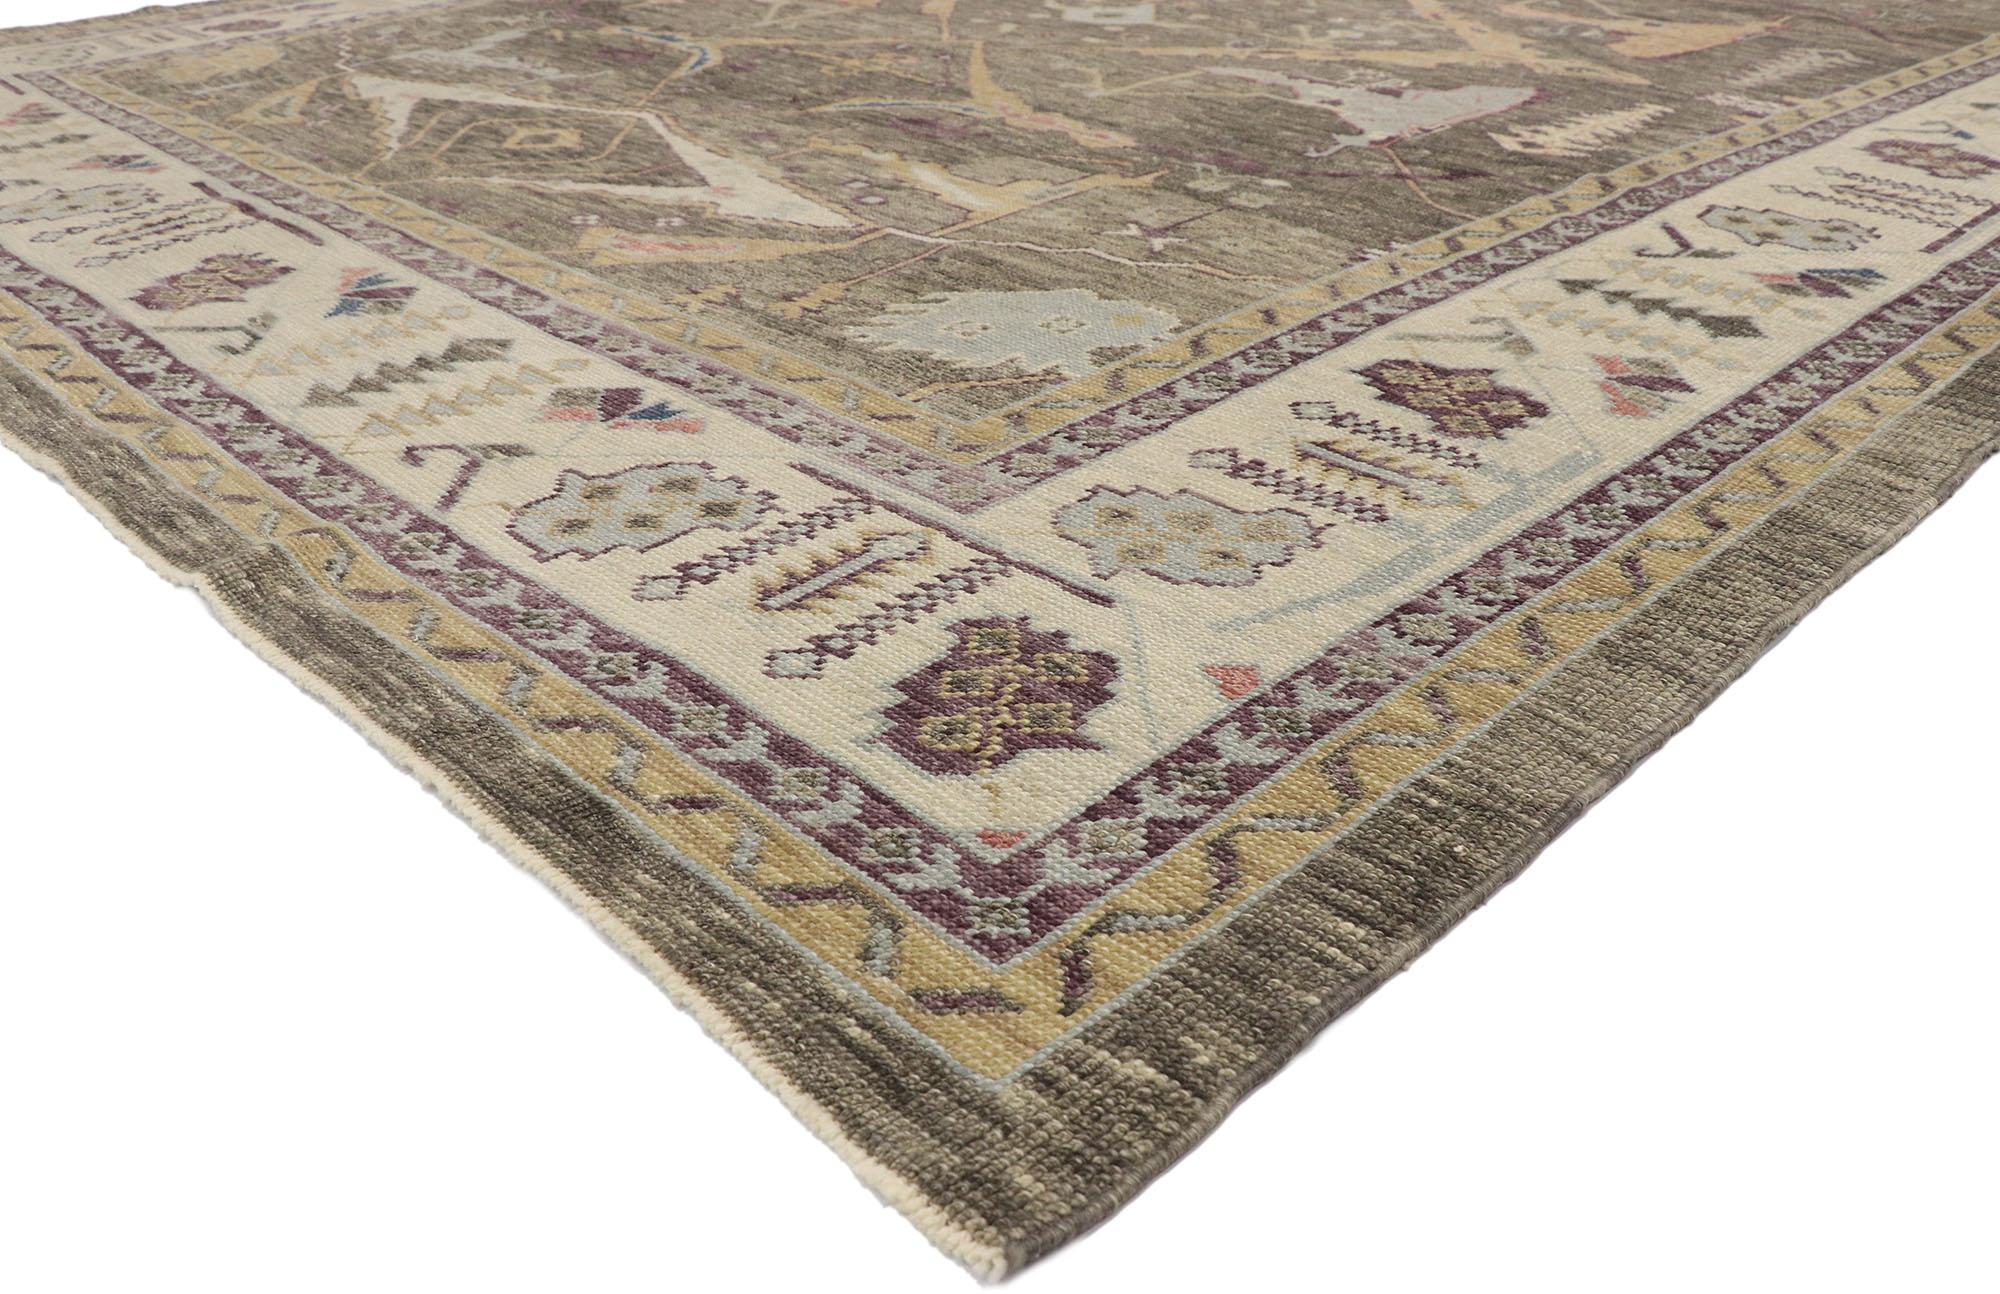 52791, new contemporary Turkish Oushak rug with Modern Artisan style. The warm colors and subdued geometric print woven into this hand knotted wool new Contemporary Turkish Oushak rug work together radiating a calm vibe. It features an asymmetrical